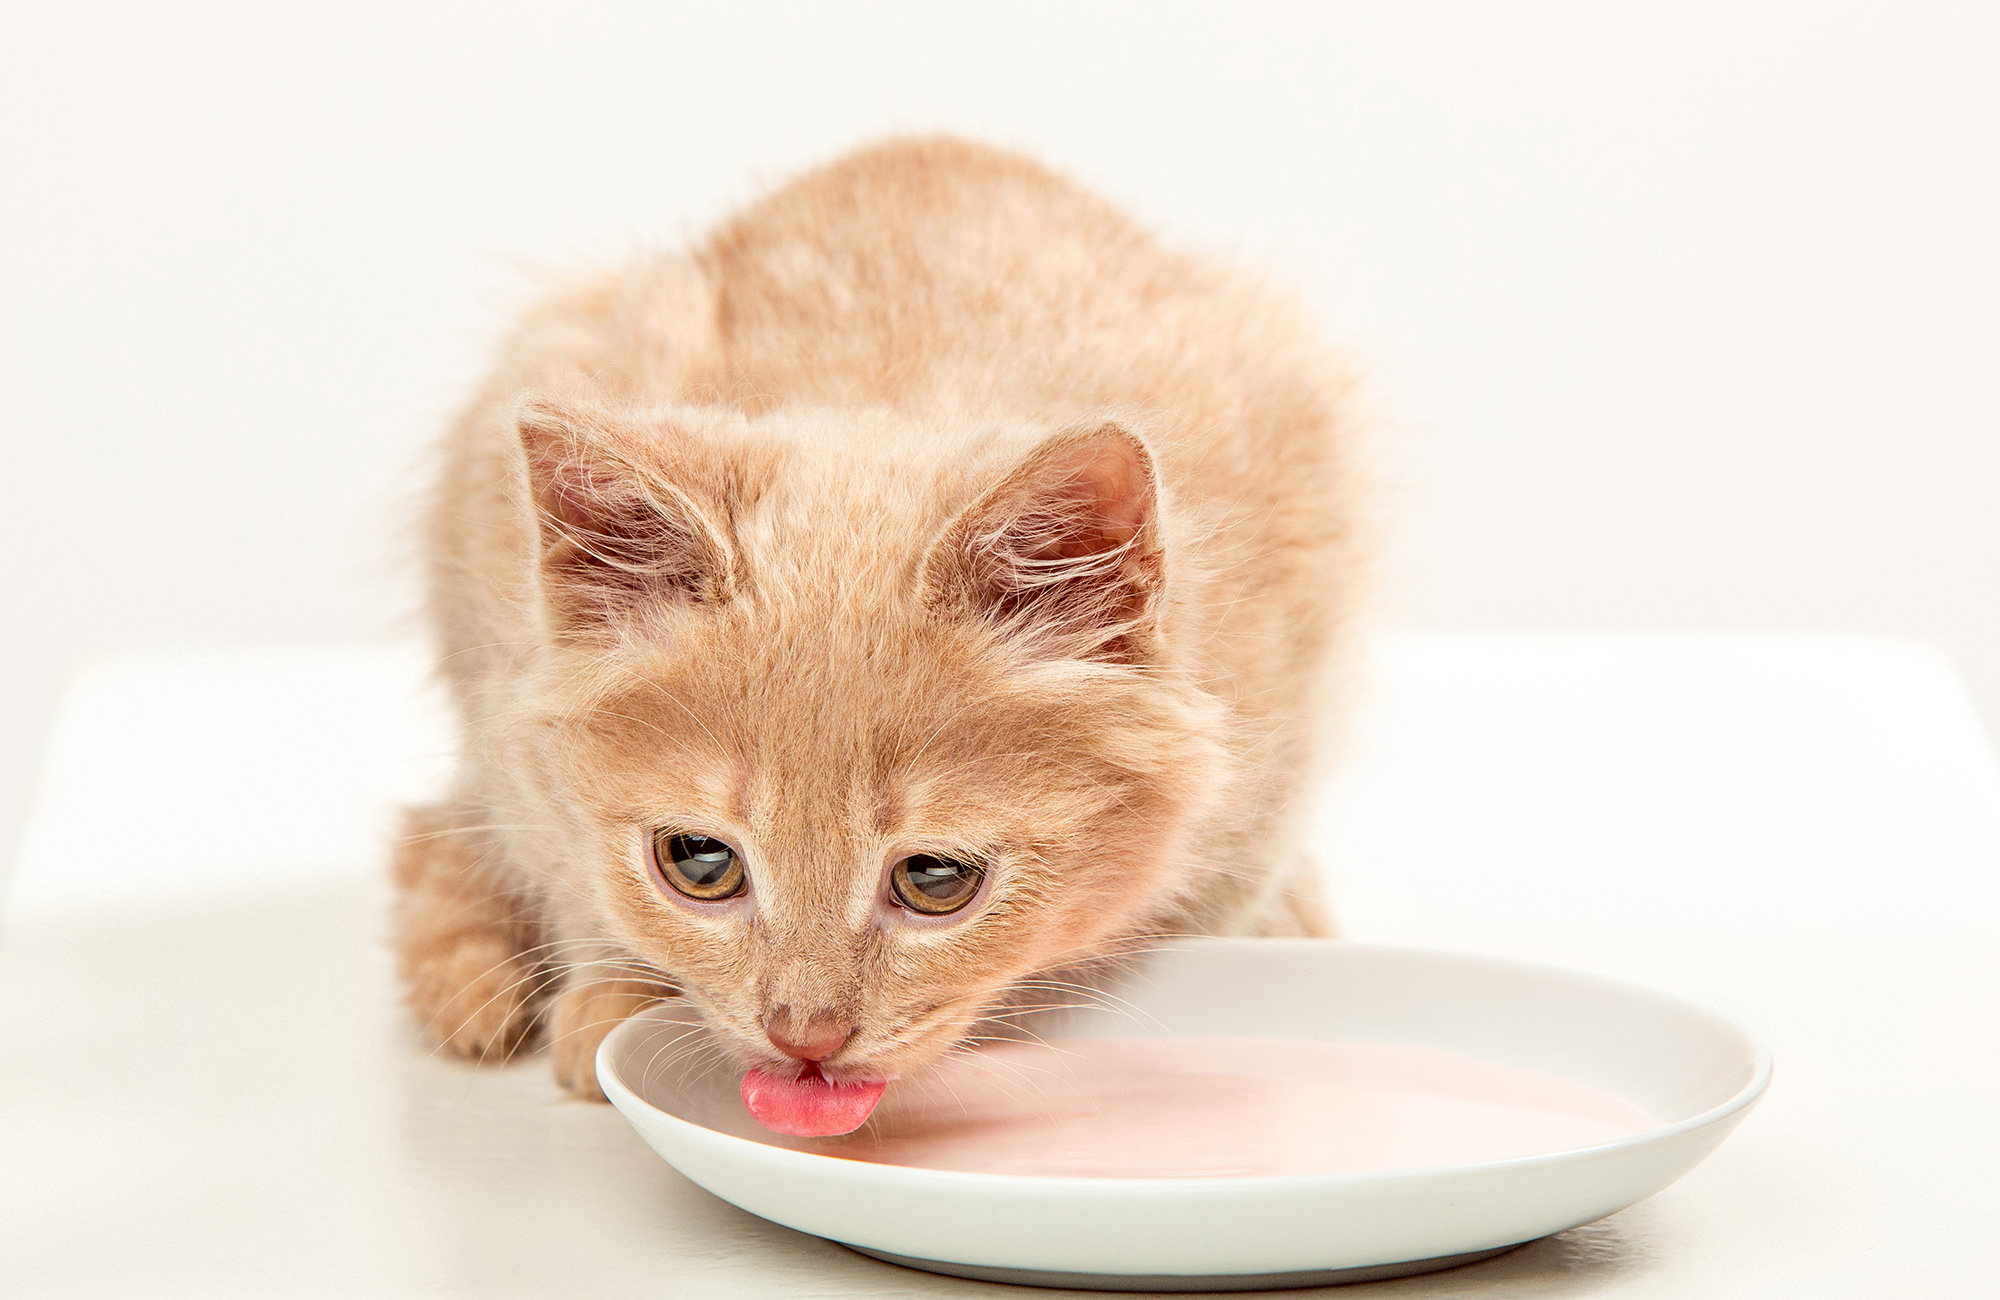 Cat Food Vs. Kitten Food: What's The Difference?